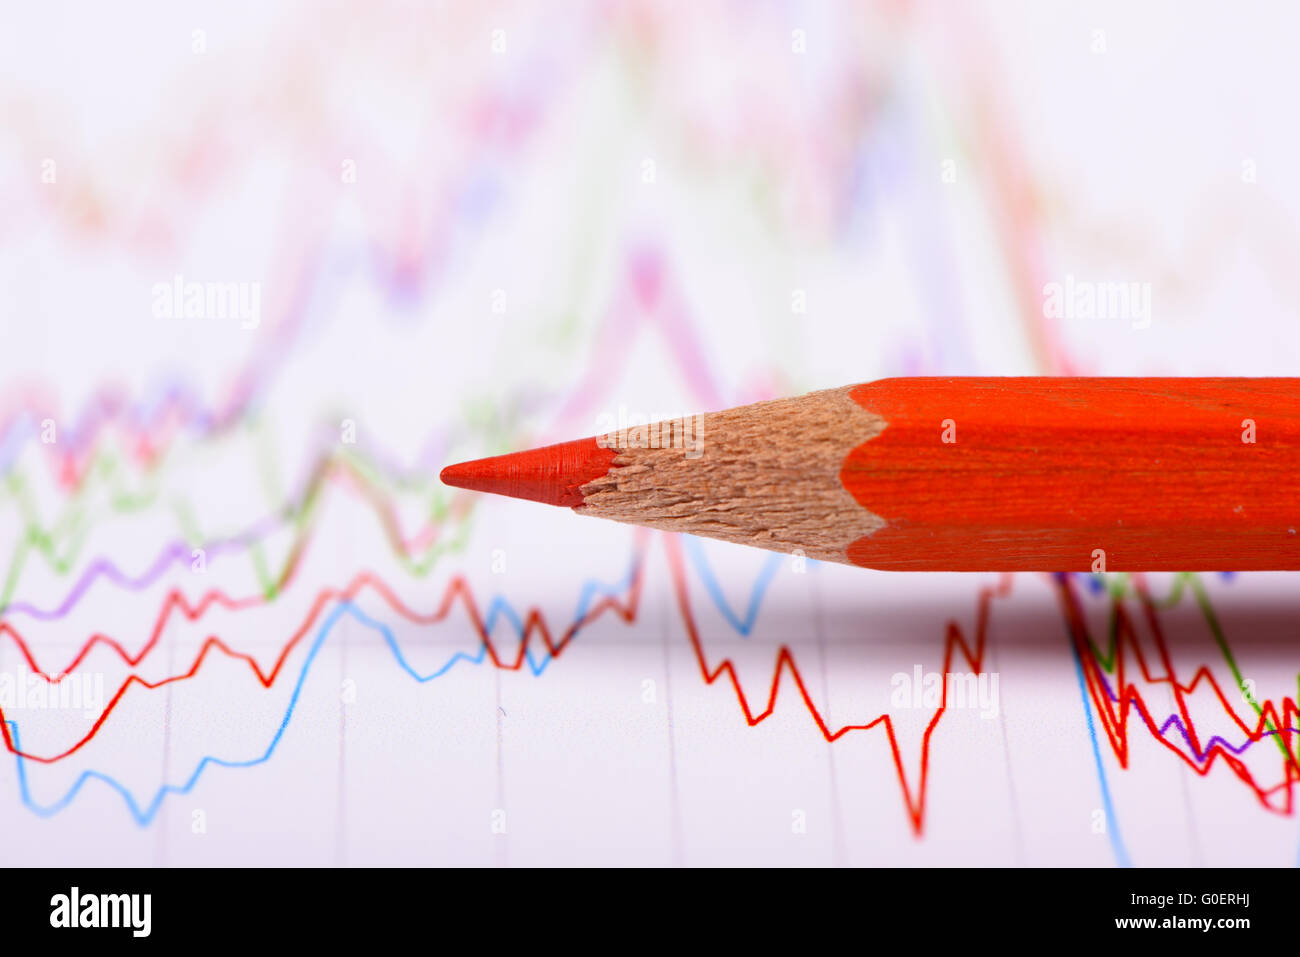 red pencil on commercial chart Stock Photo